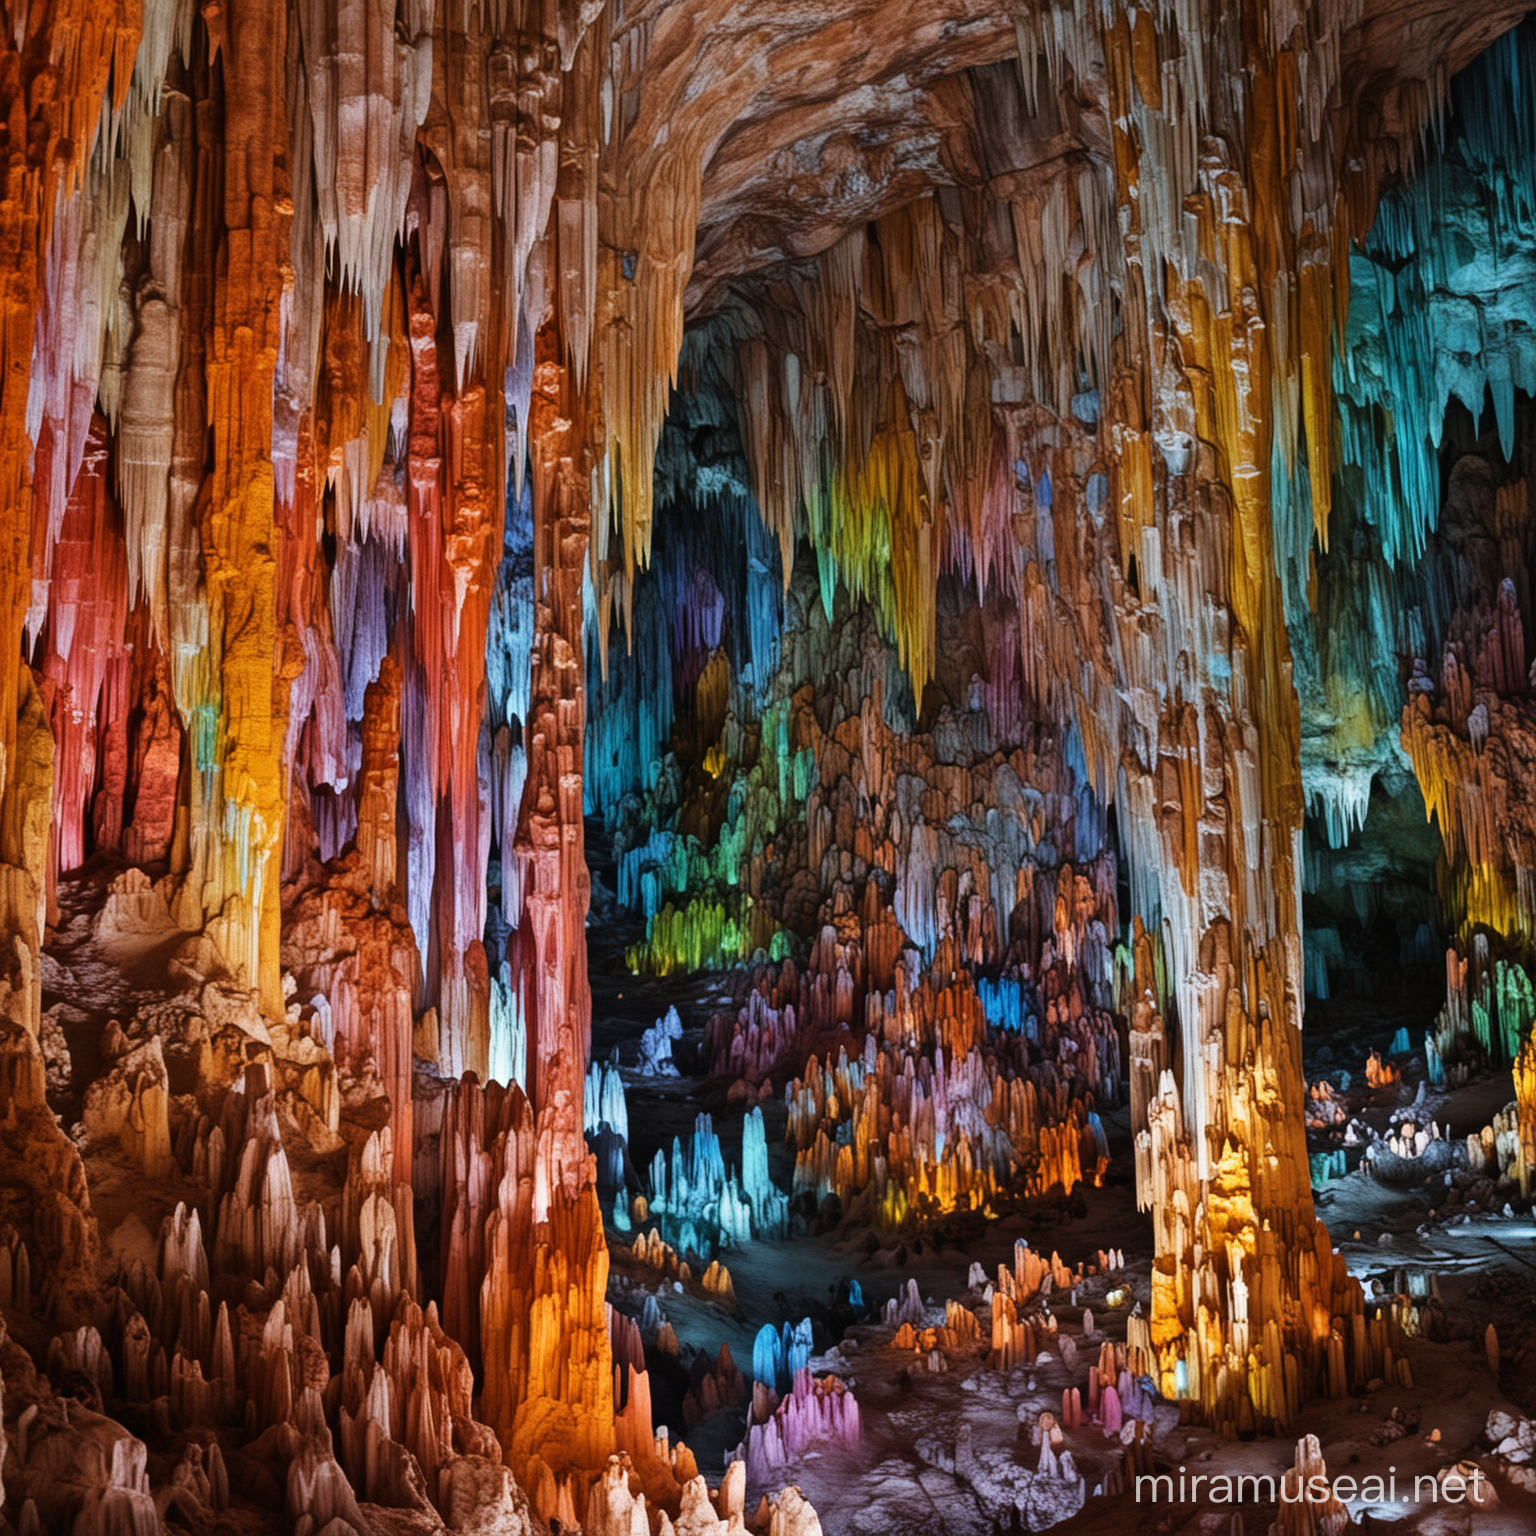 Vibrant Stalactite Formations in Chinas Caves